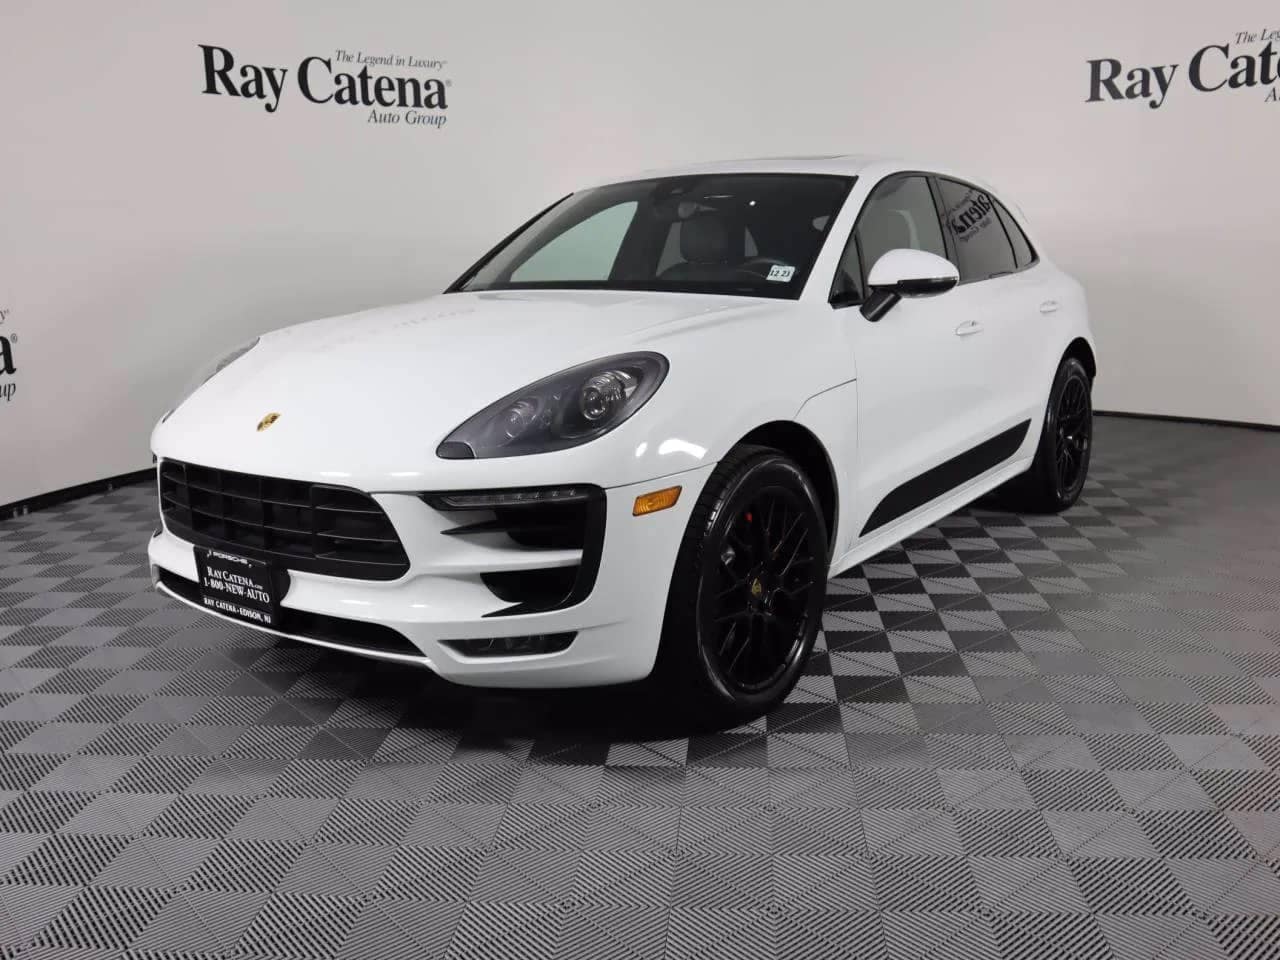 Certified Pre-Owned 2018 Porsche Macan GTS SUV for sale in Edison New Jersey